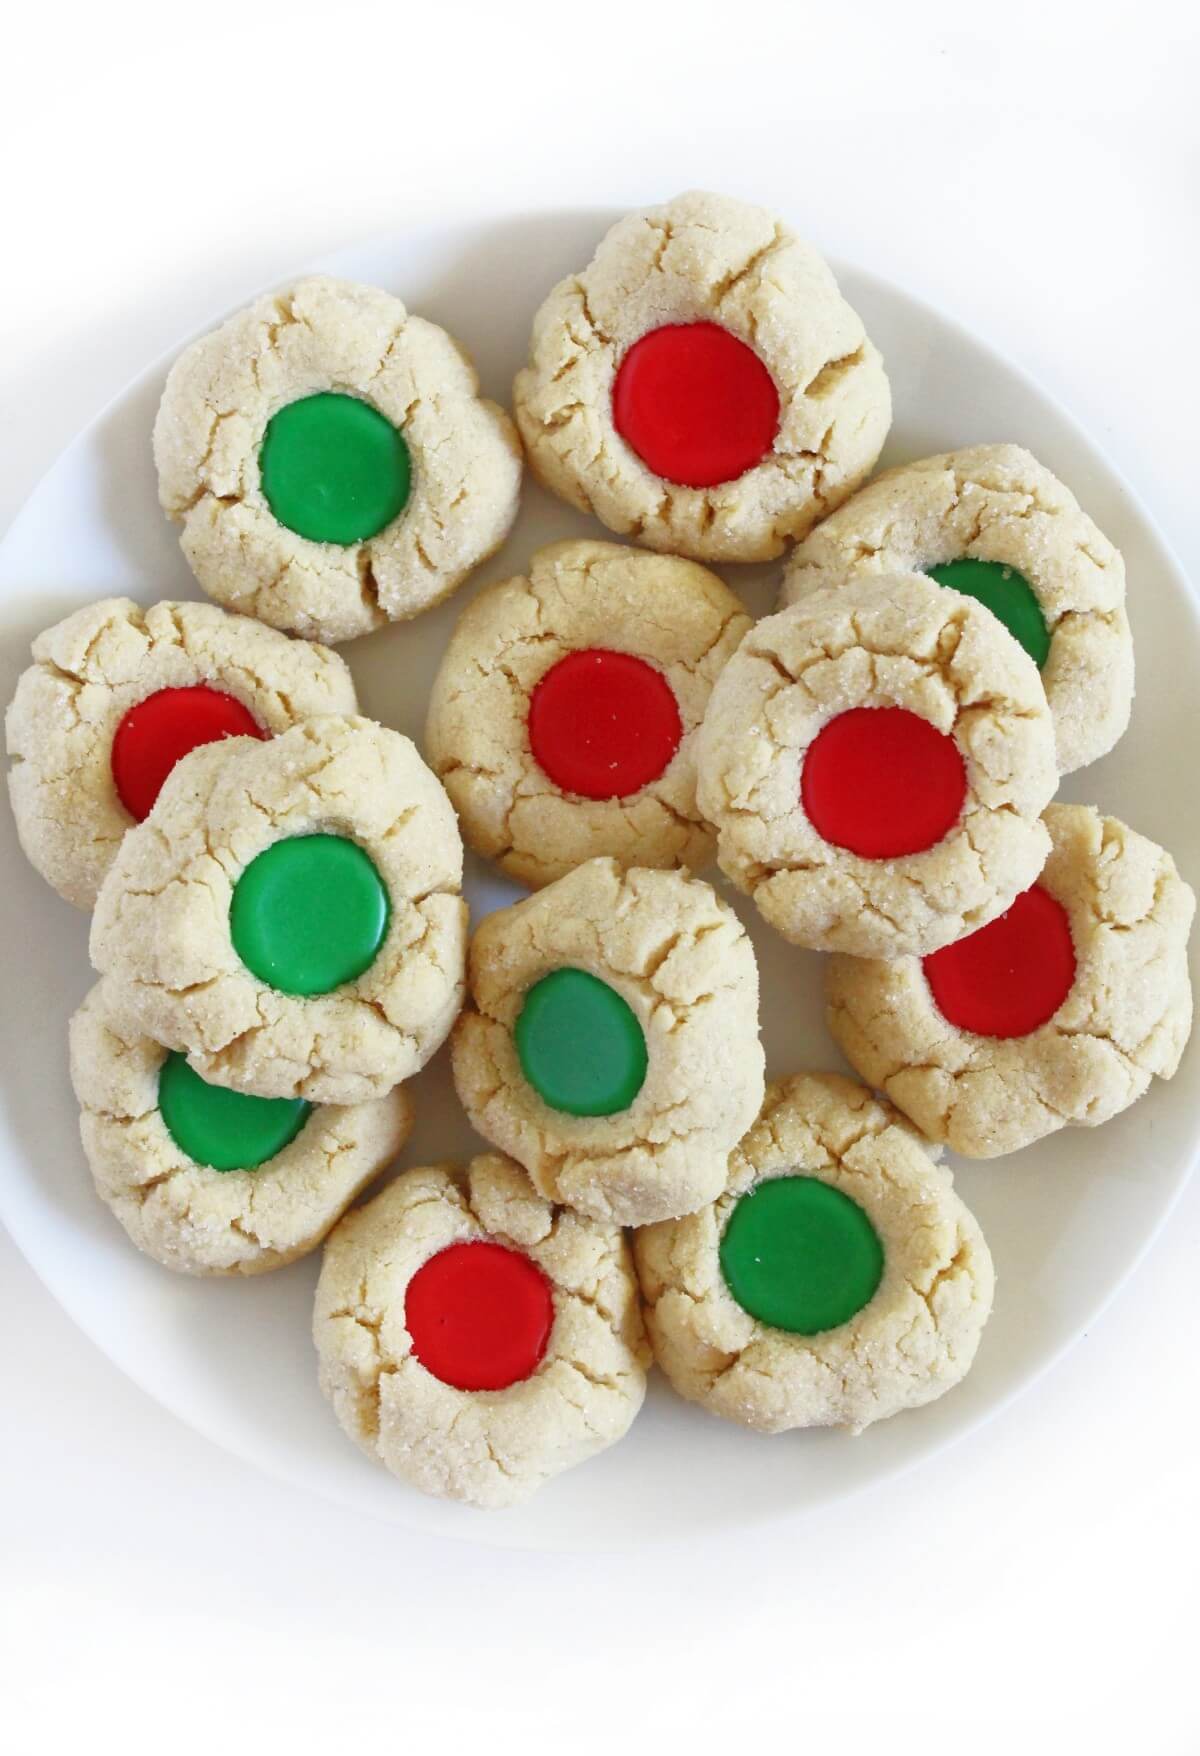 plate of gluten-free thumbprint cookies with red and green icing.